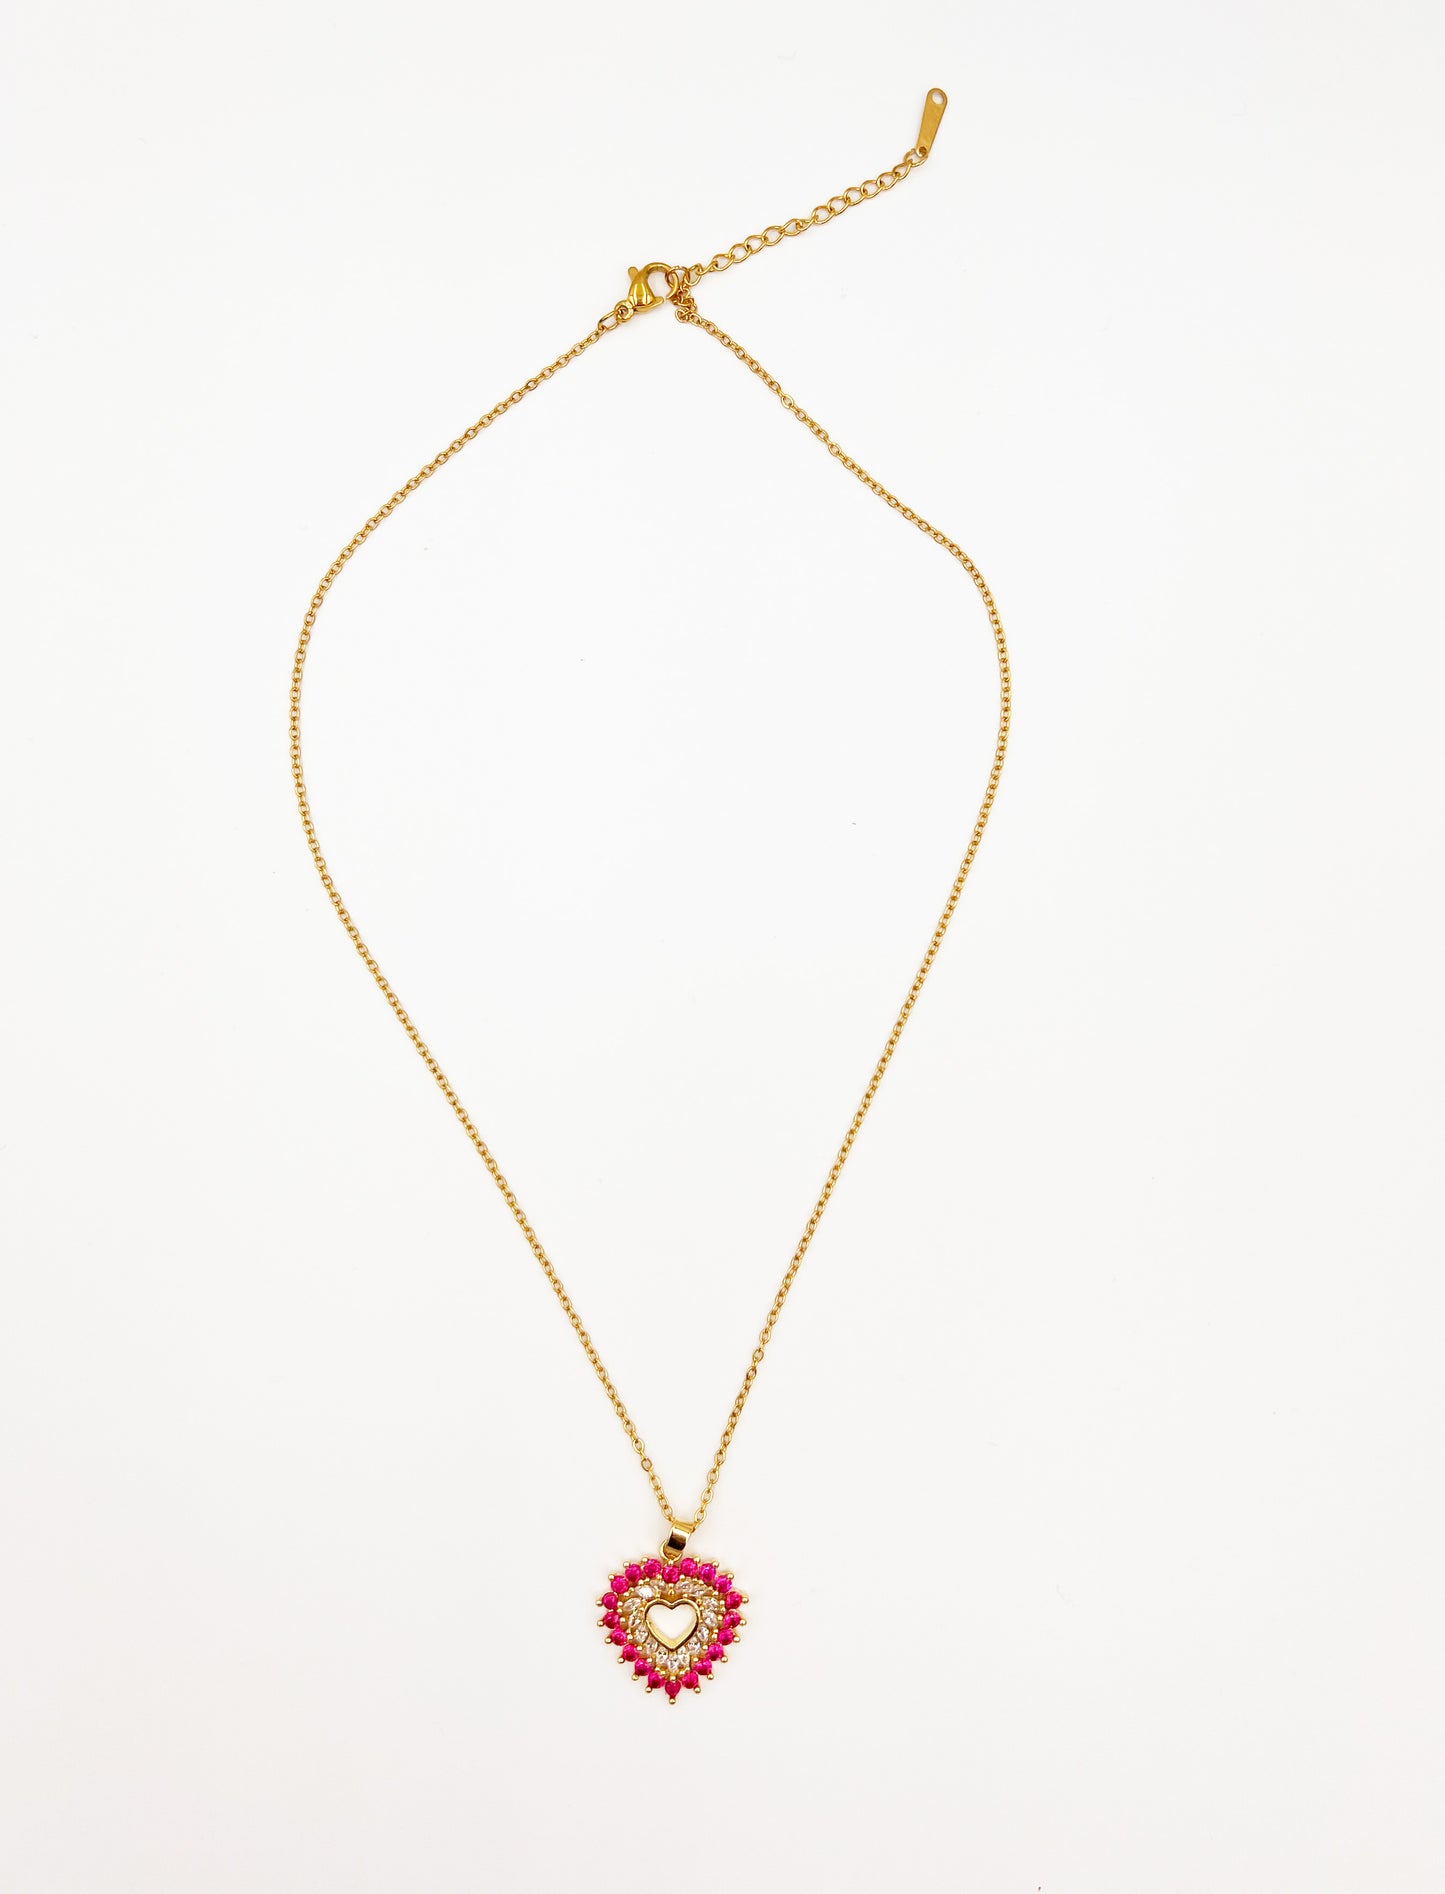 Pink Love Heart Necklace